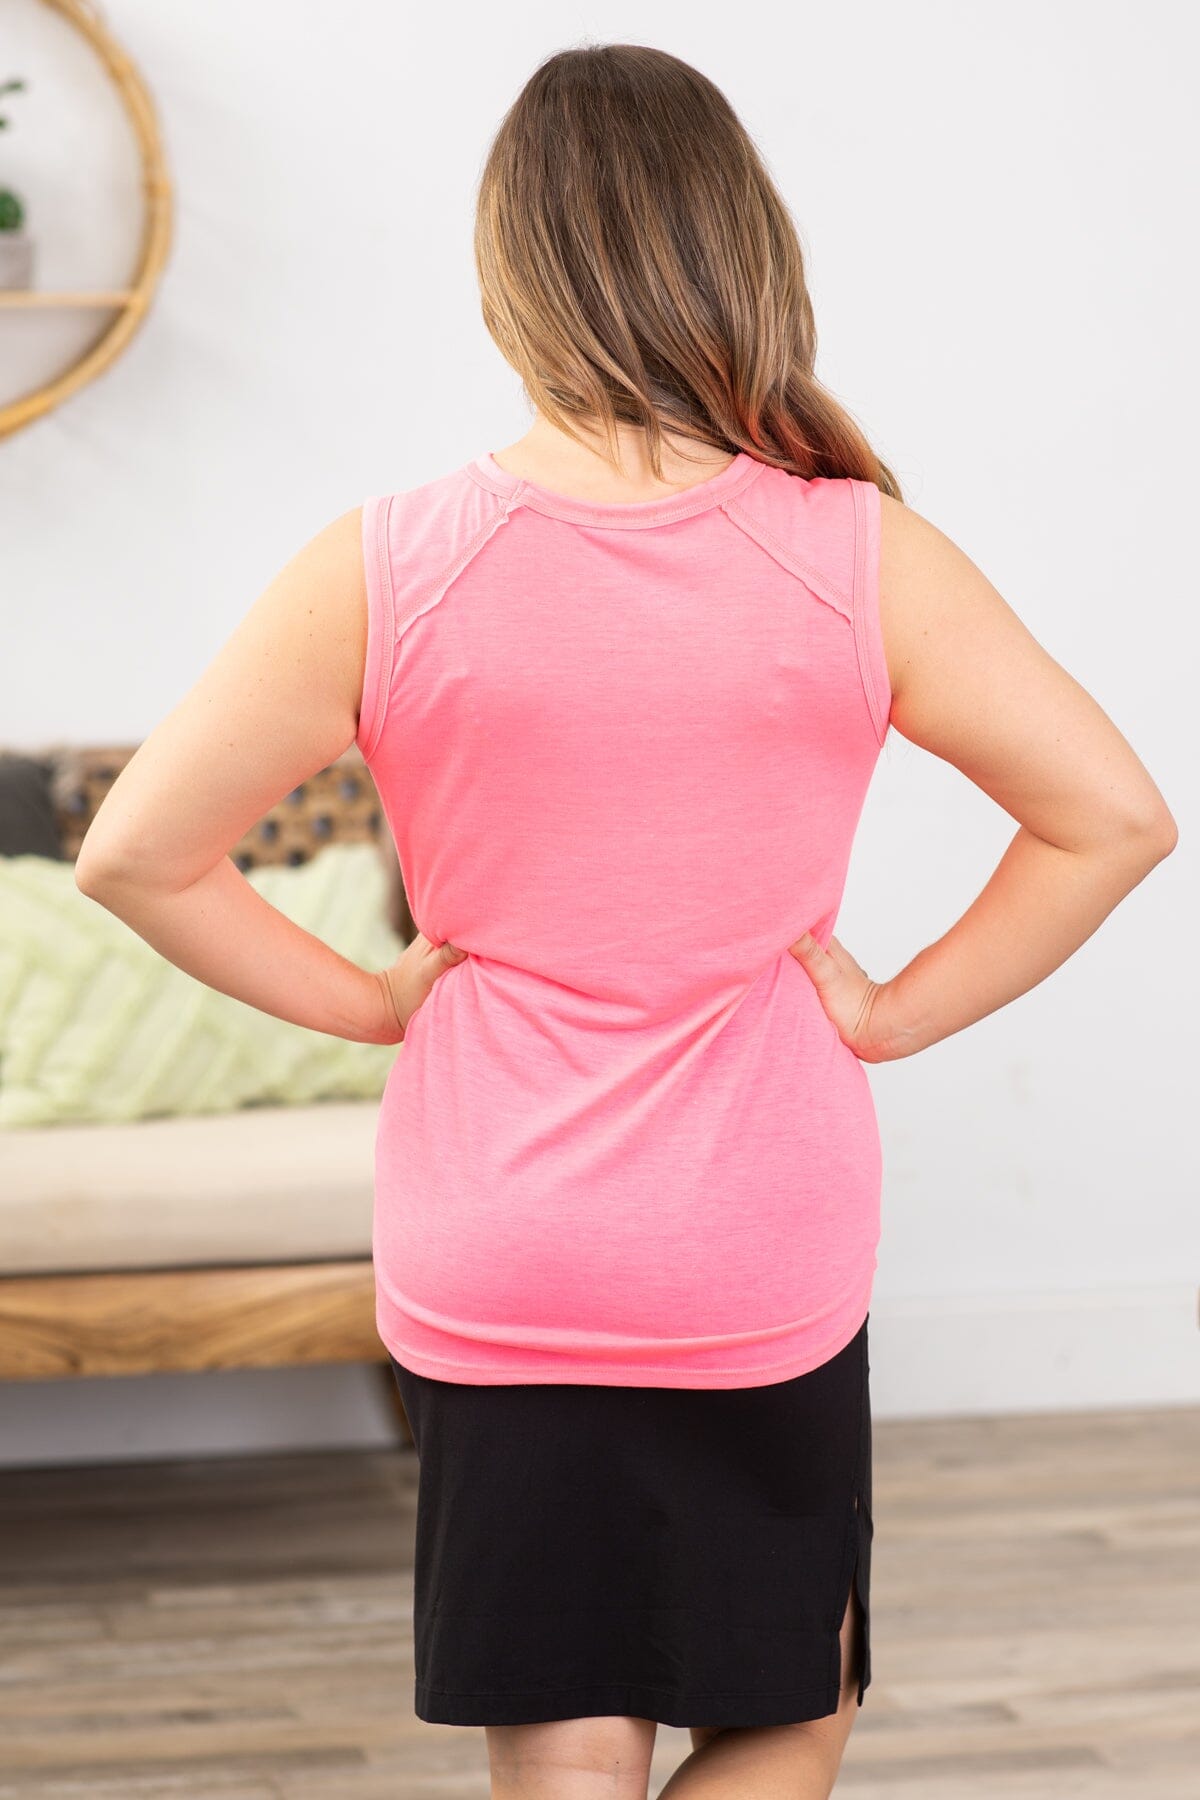 Hot Pink Tank With Contrast Stitch Detail - Filly Flair